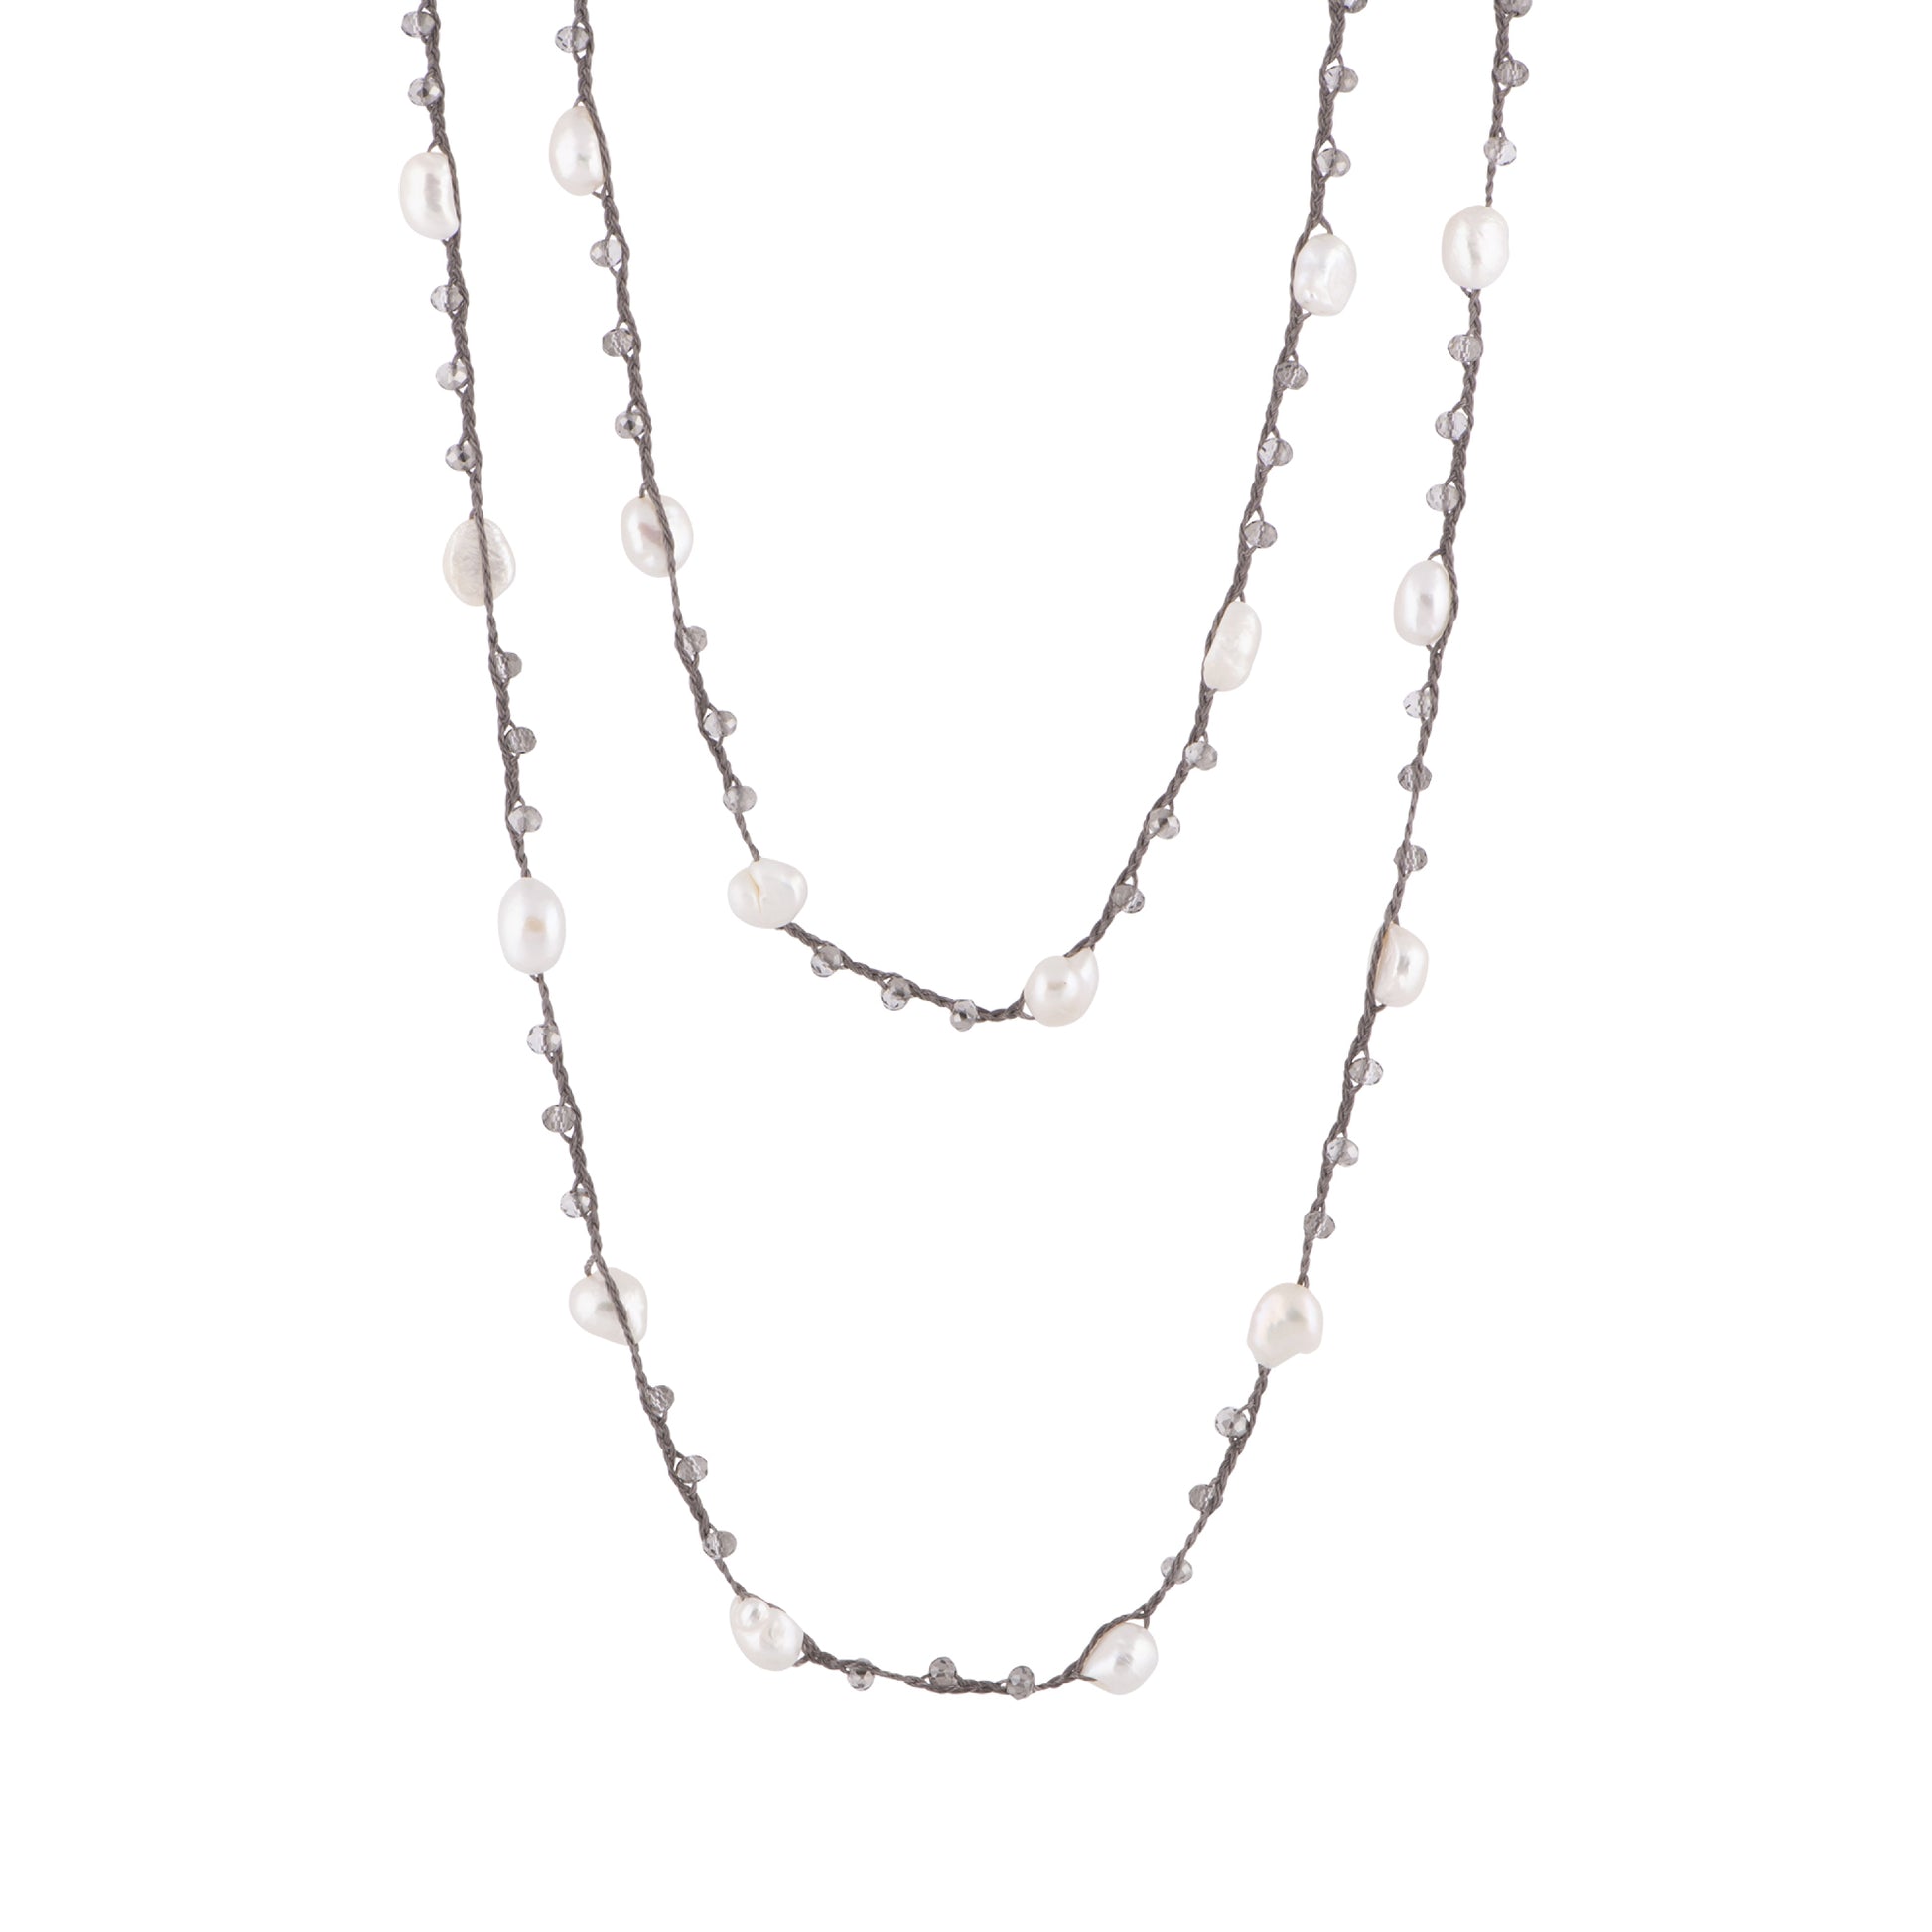 Antonia - Crochet crystal necklace with freshwater pearls (White pearls, layered)